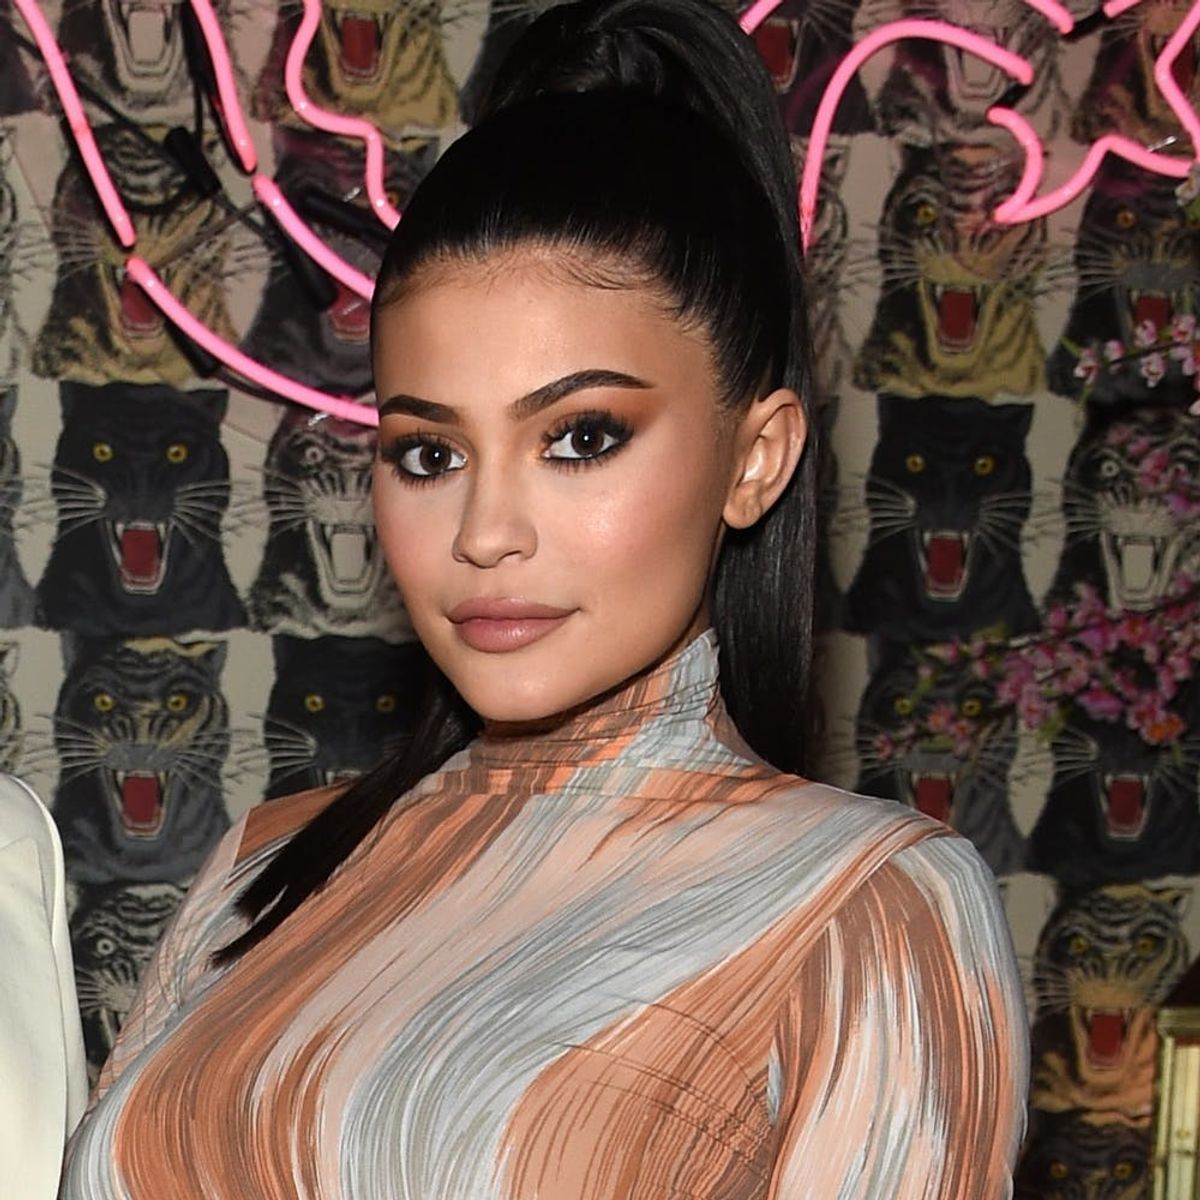 Kylie Jenner Gifted a Fan With a Louis Vuitton Backpack, Because Kylie Jenner